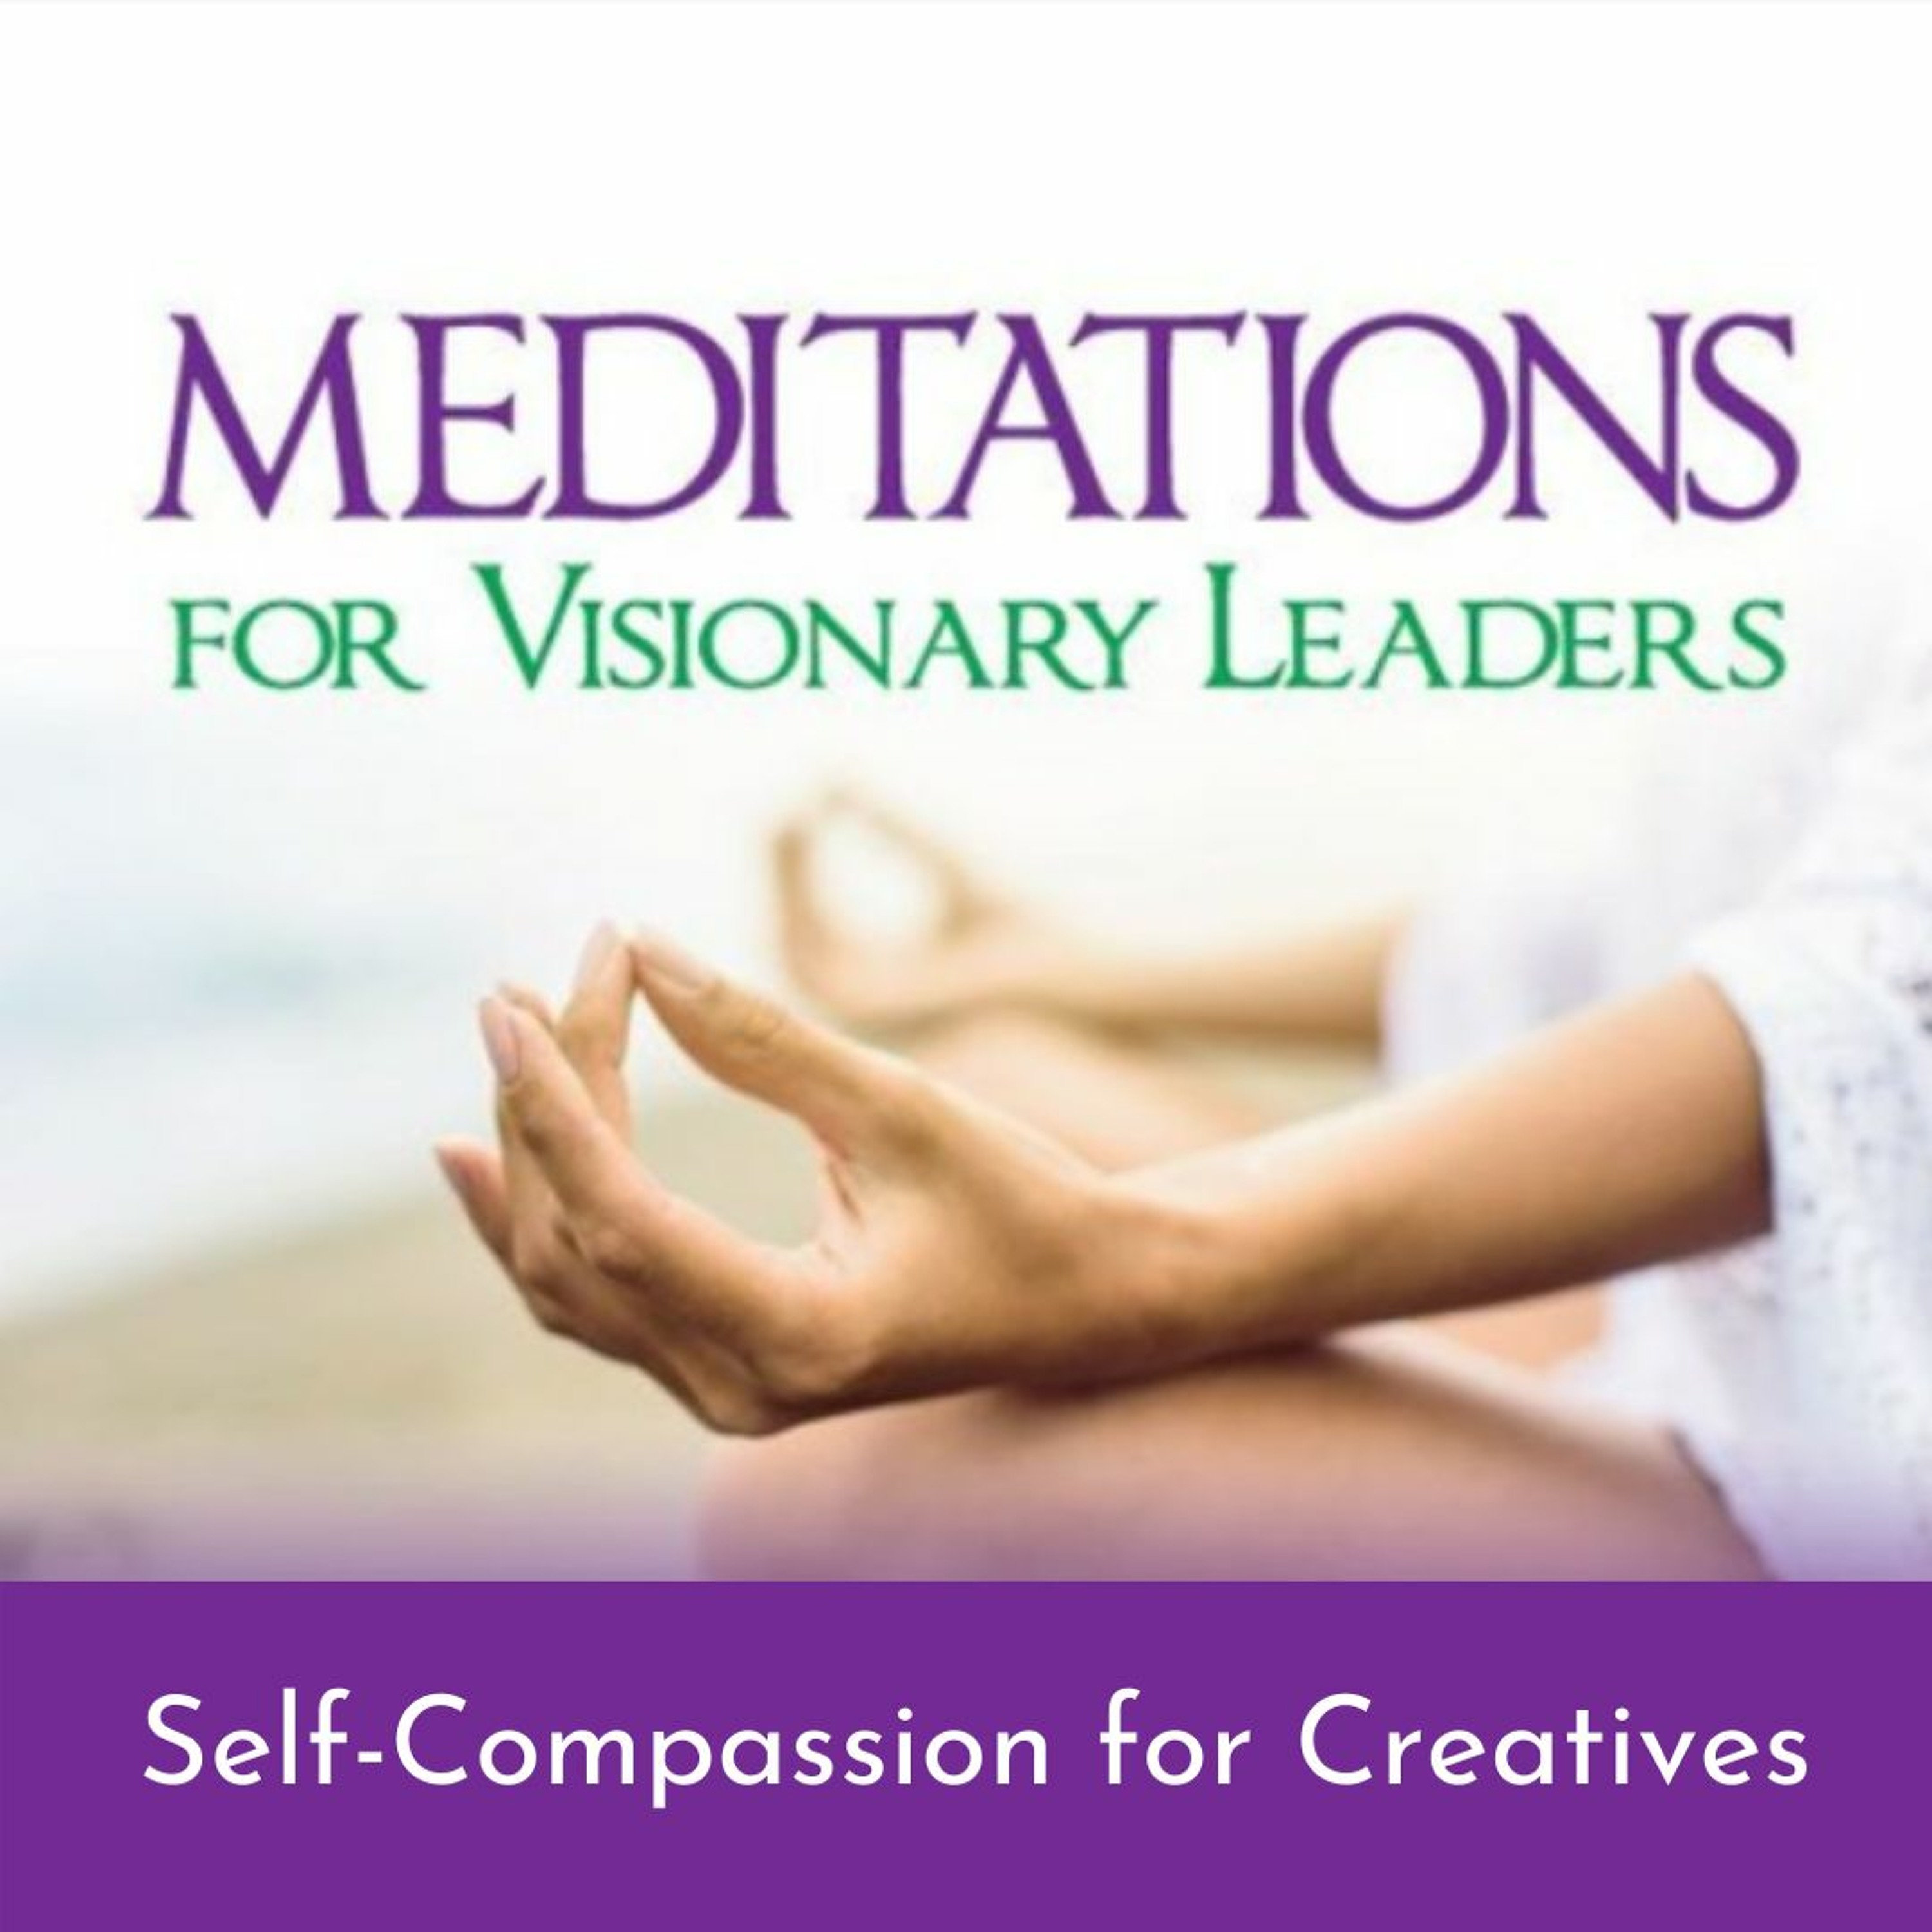 Self-Compassion for Creatives Meditation with Cynthia Phelps